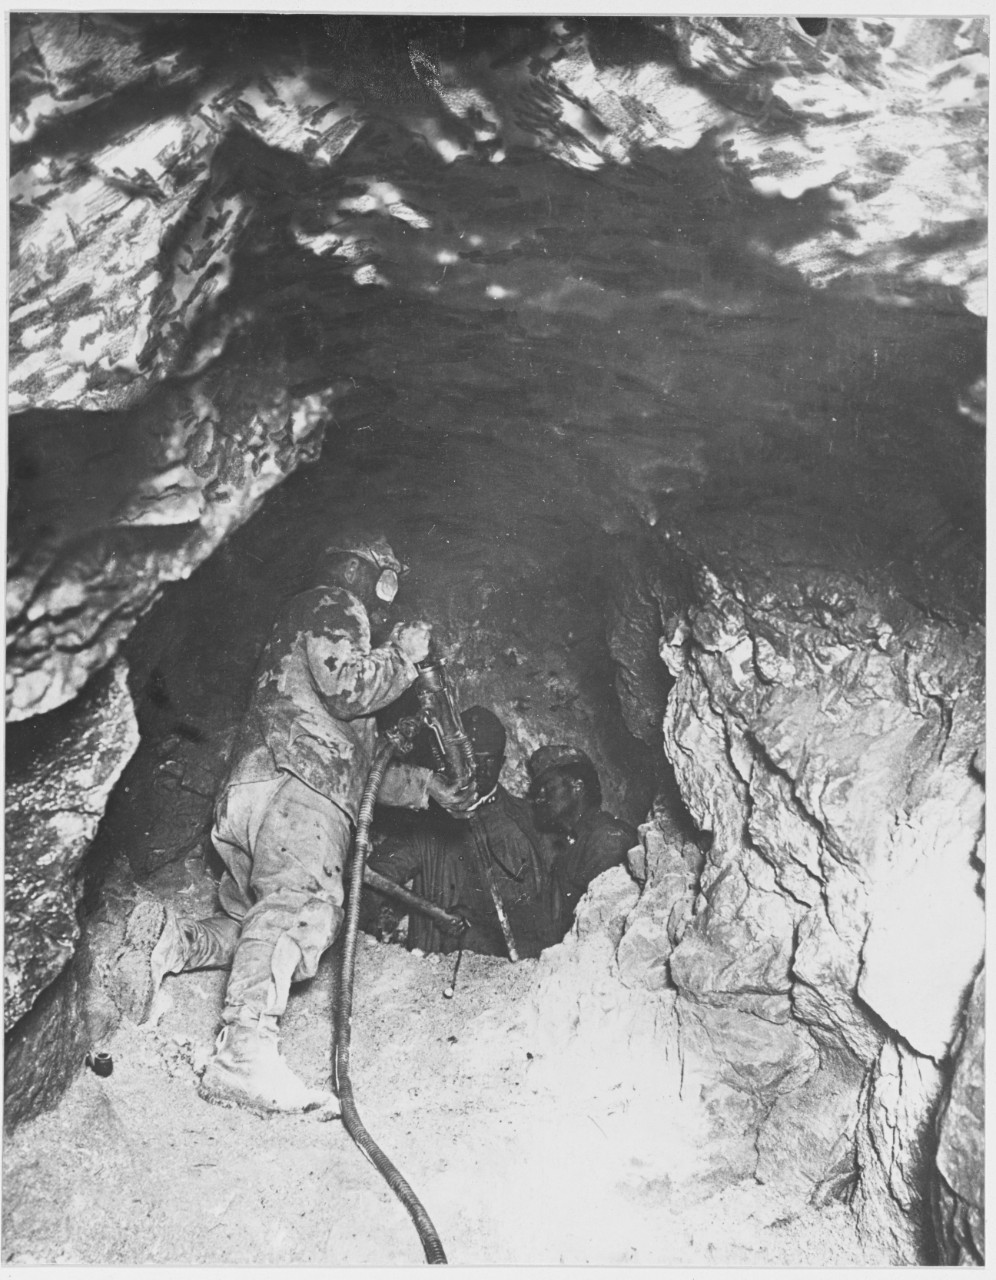 Austrian sappers boring in a rock cavern on the Italian front. Austria-Hungary.